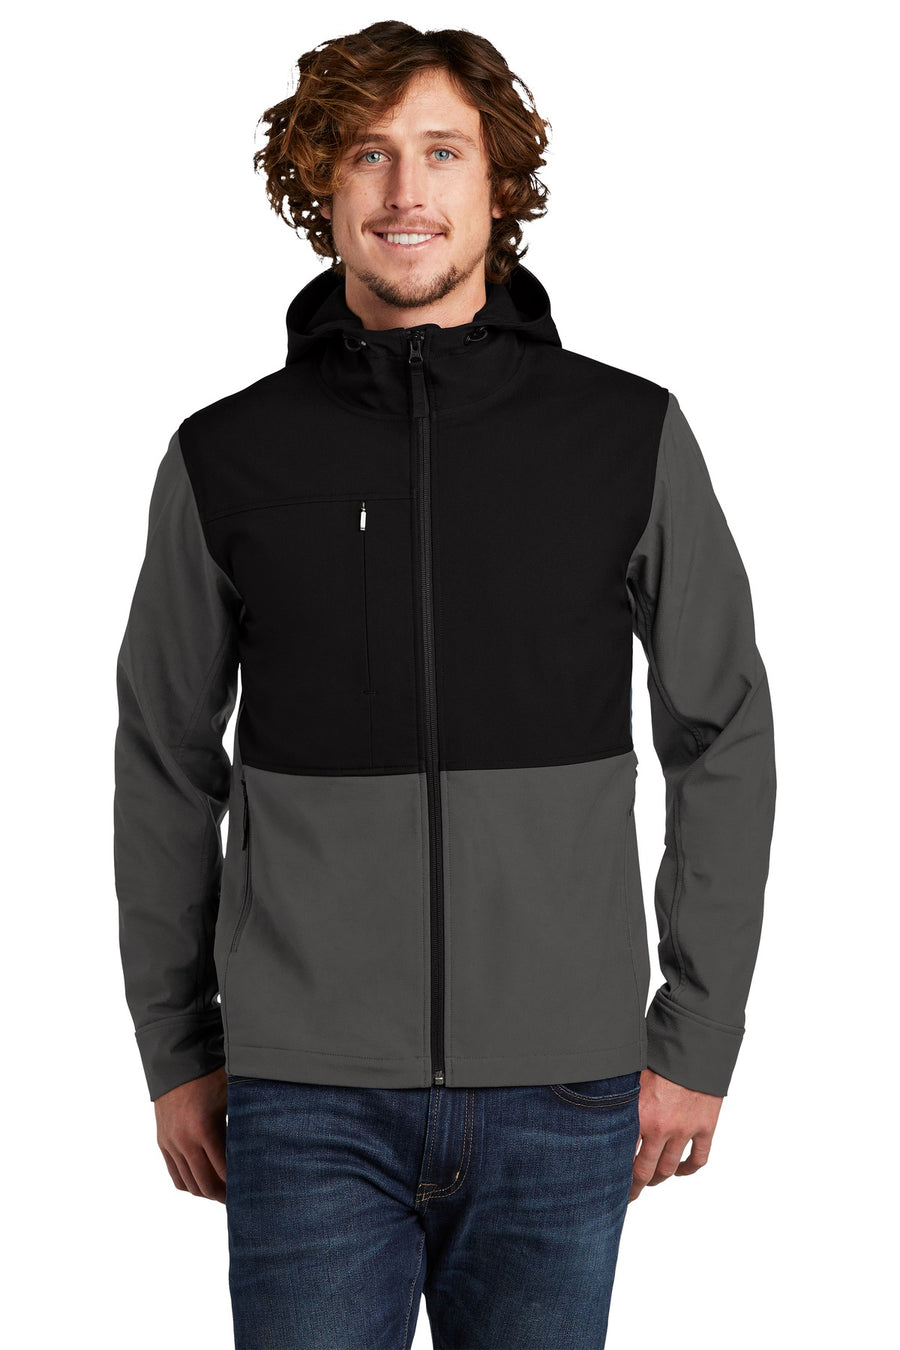 The North Face Castle Rock Hooded Soft Shell Jacket.